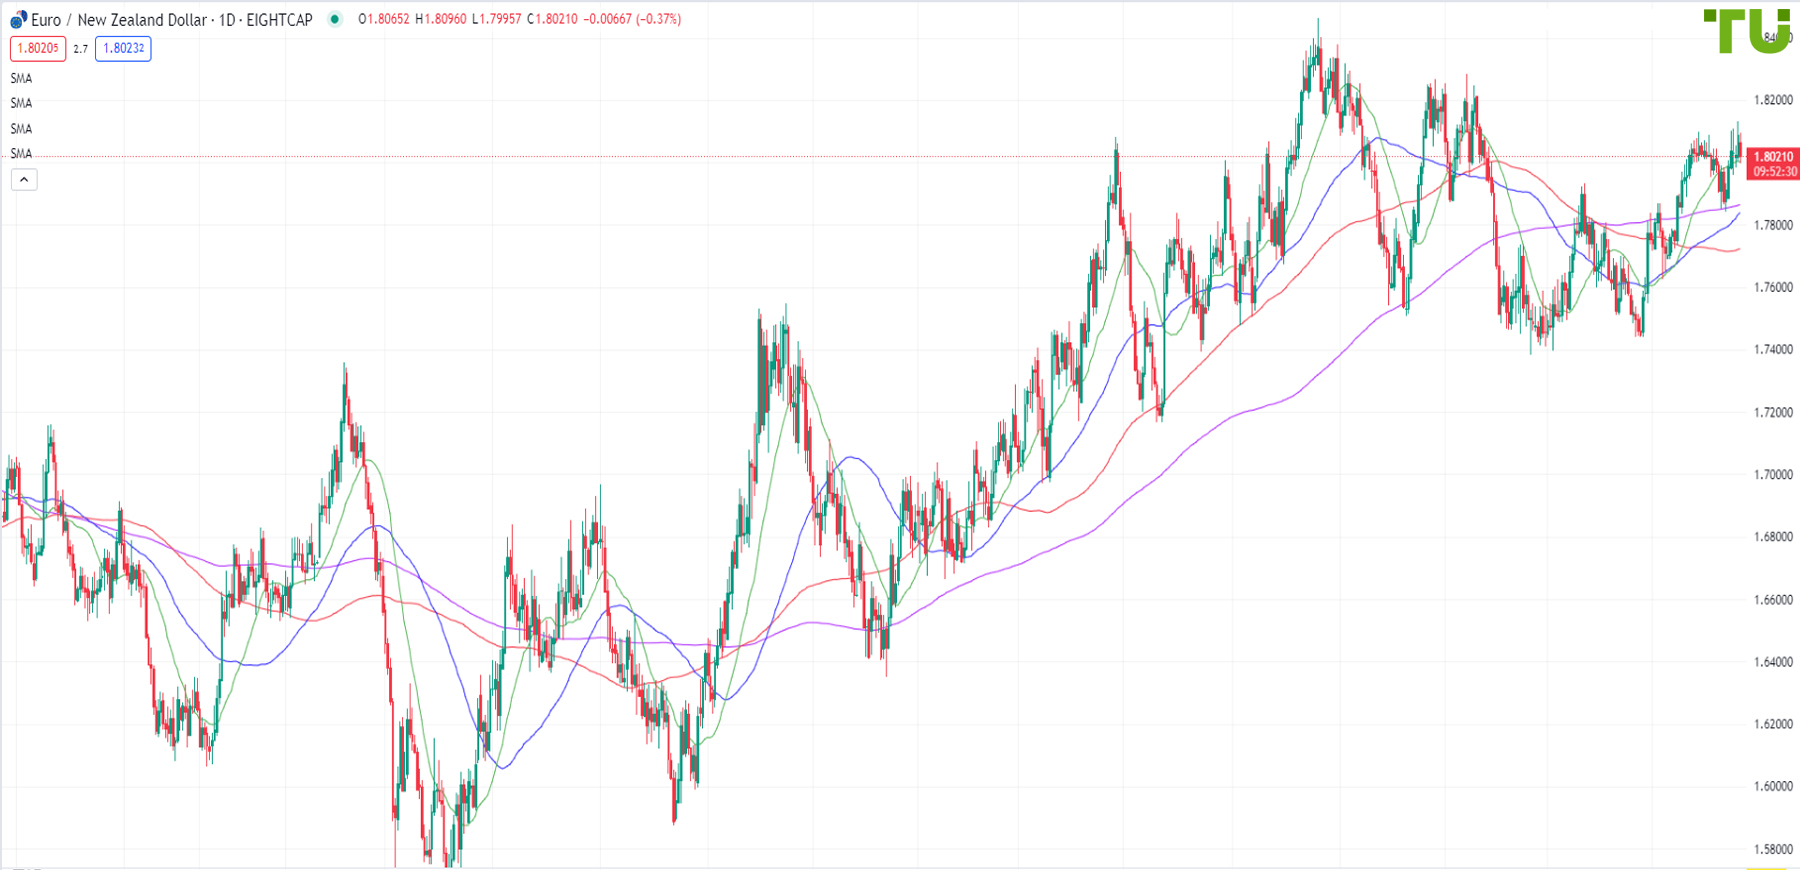 EUR/NZD persists in its decline